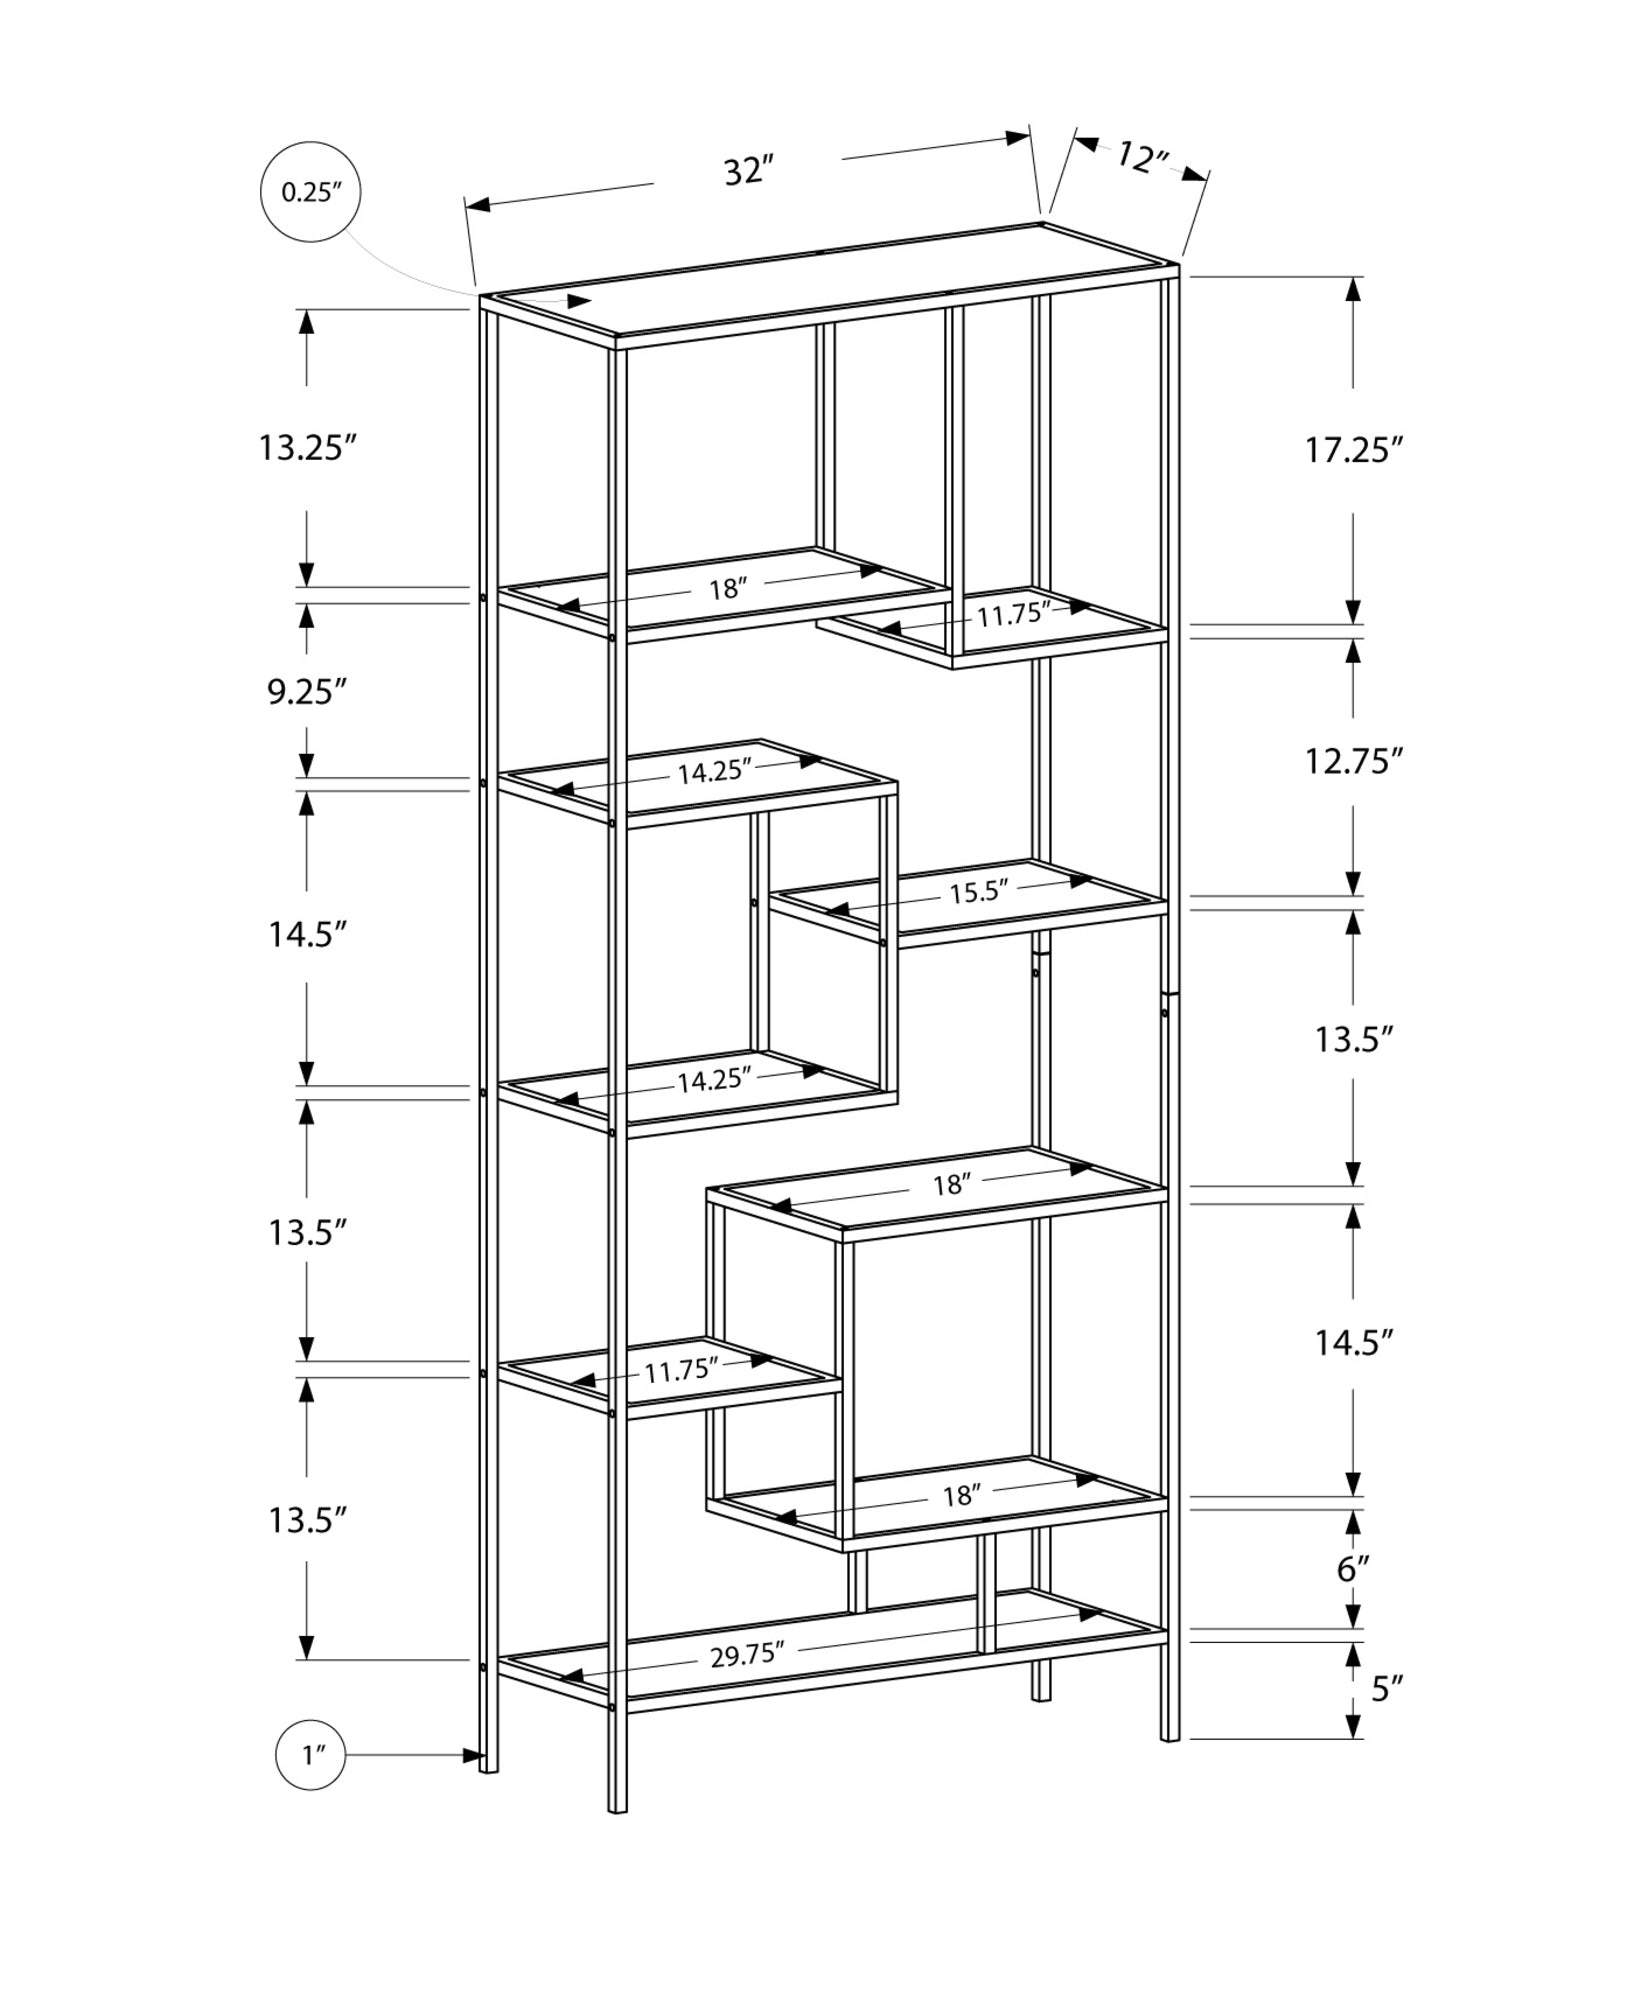 72" Silver Metal And Glass Etagere Bookcase